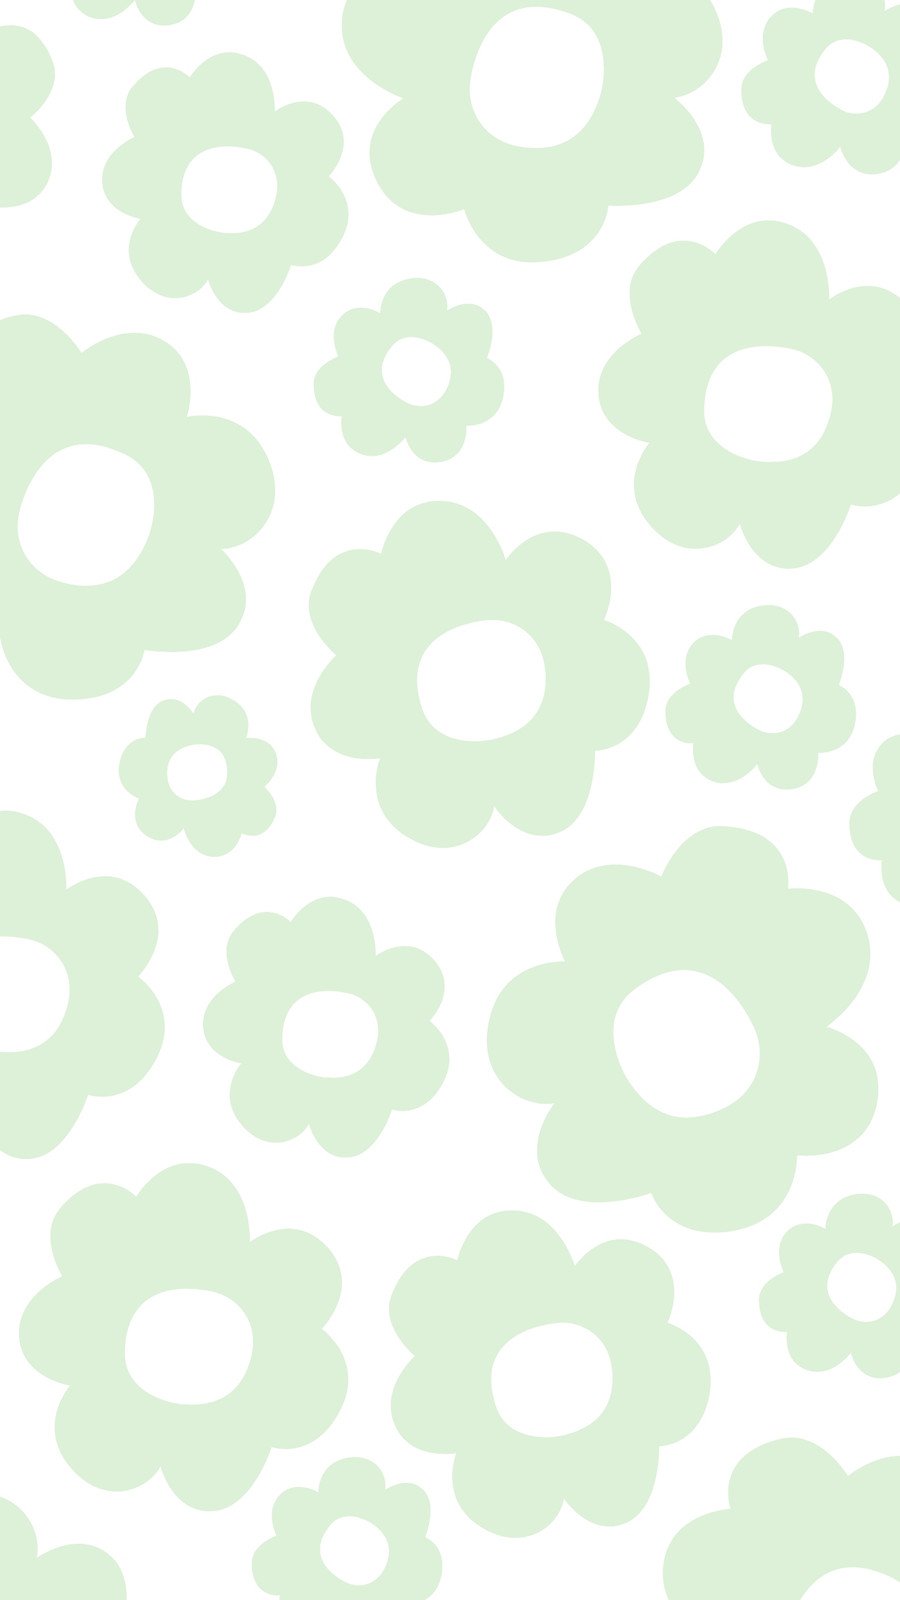 60 Green Backgrounds - World of Printables